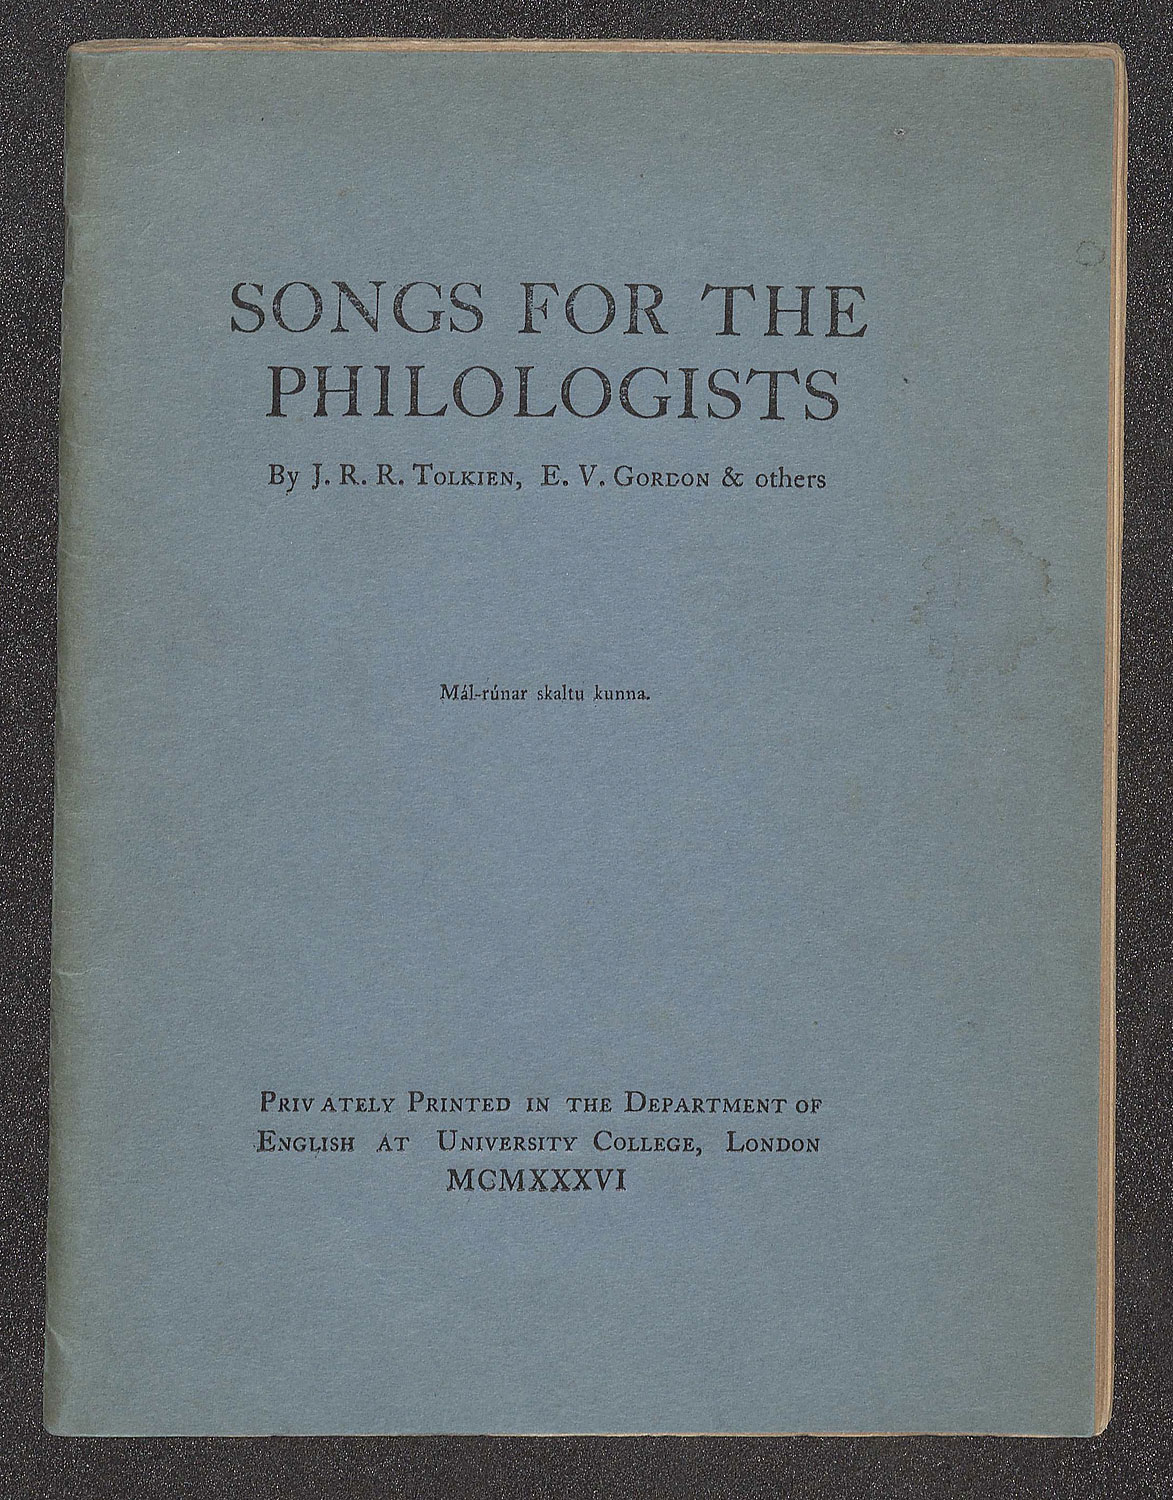 Songs for the Philologists | Première édition anglaise chez University College